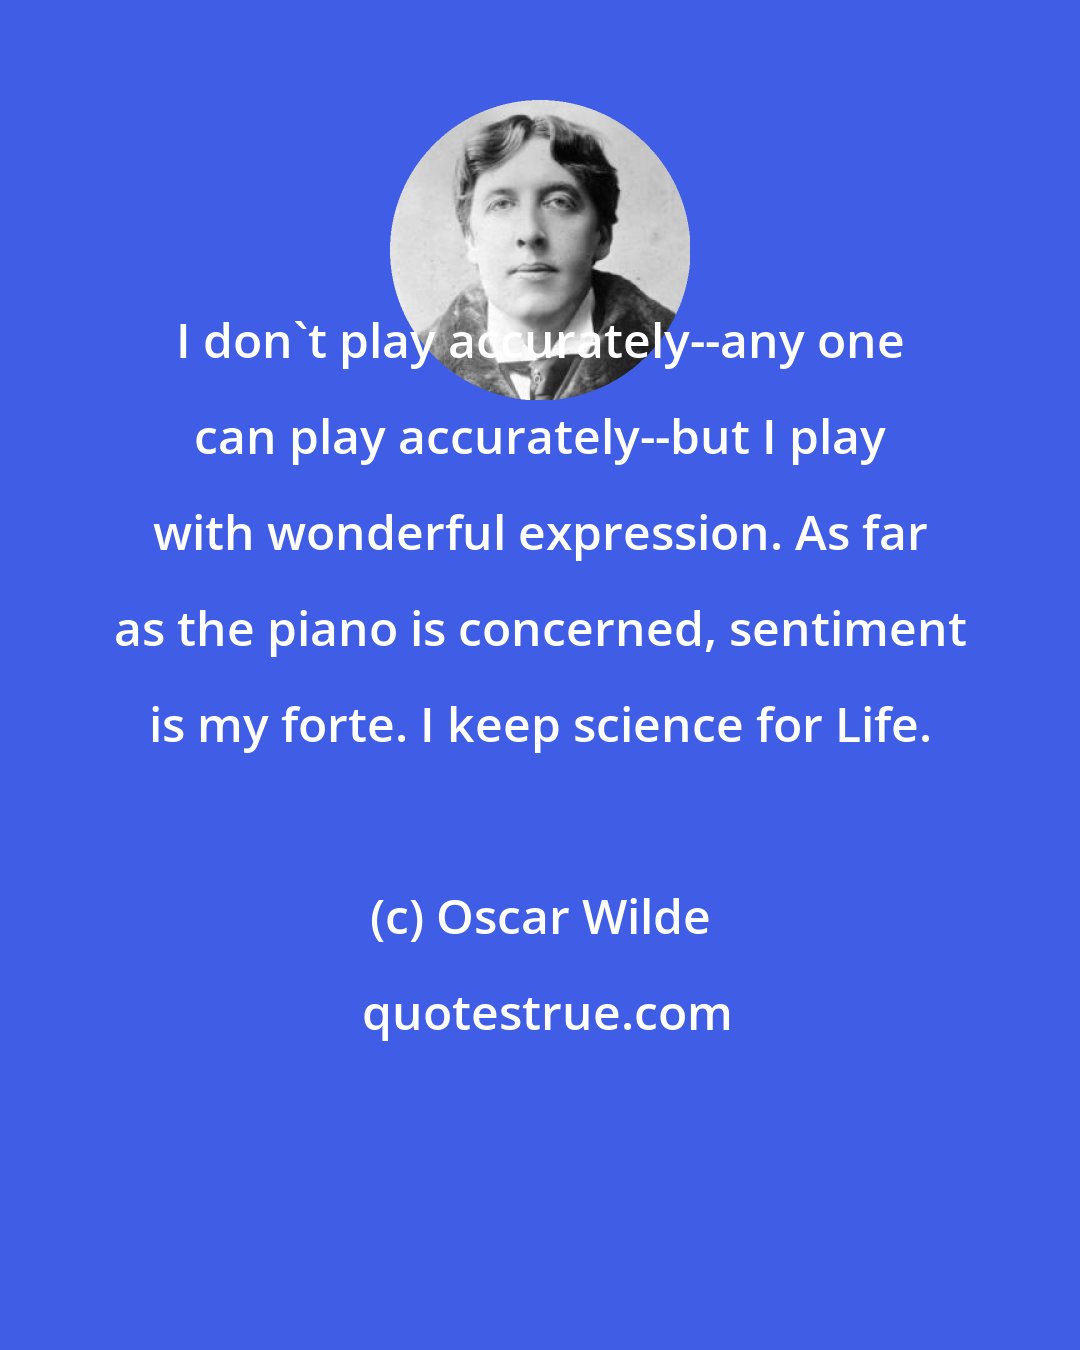 Oscar Wilde: I don't play accurately--any one can play accurately--but I play with wonderful expression. As far as the piano is concerned, sentiment is my forte. I keep science for Life.